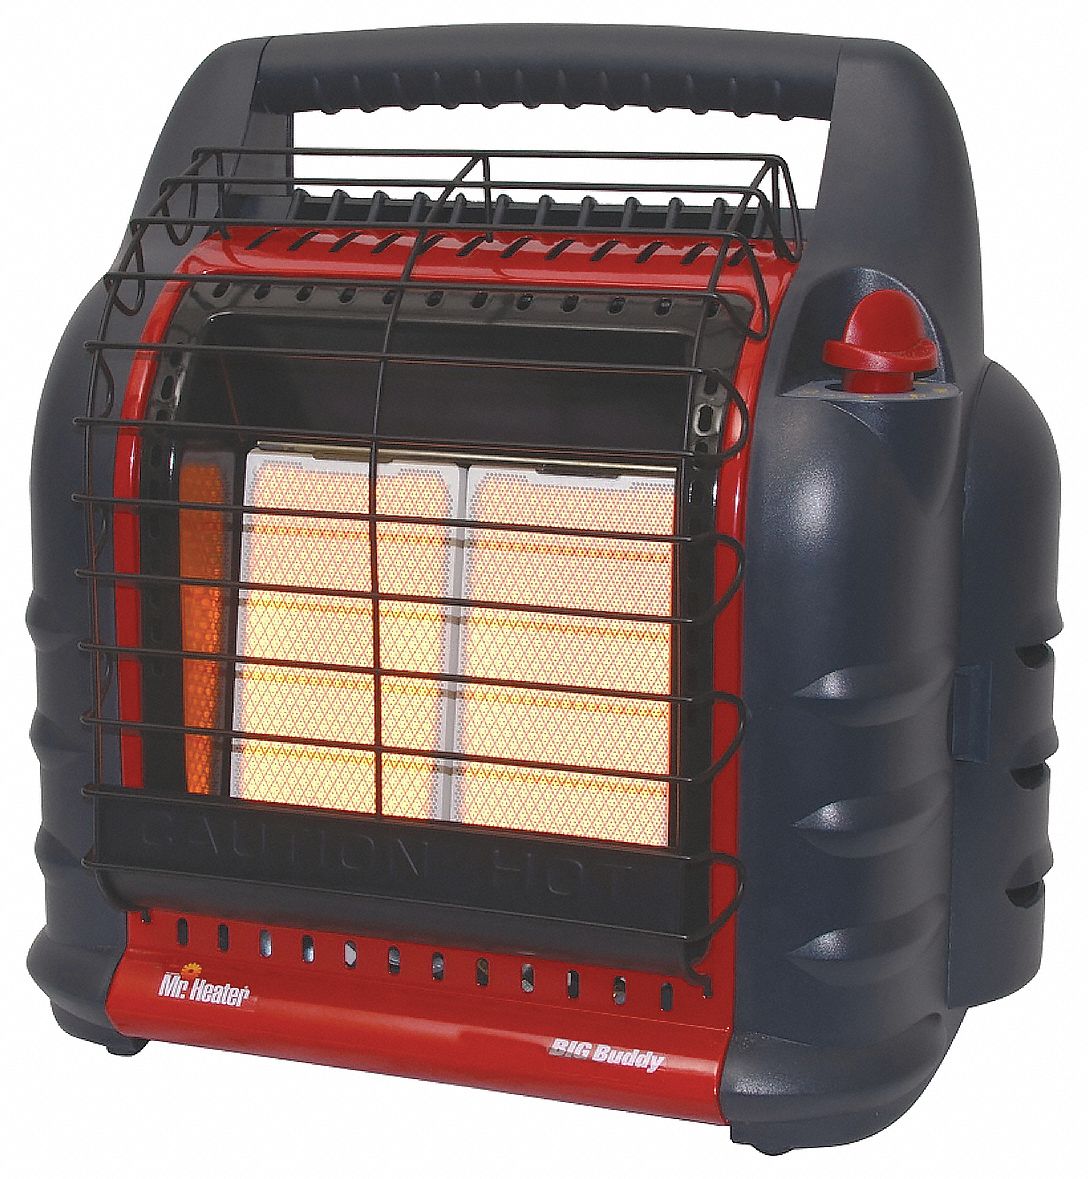 Portable Gas Tabletop Heater: 18,000 BtuH Heating Capacity Output, 450 sq ft Heating Area